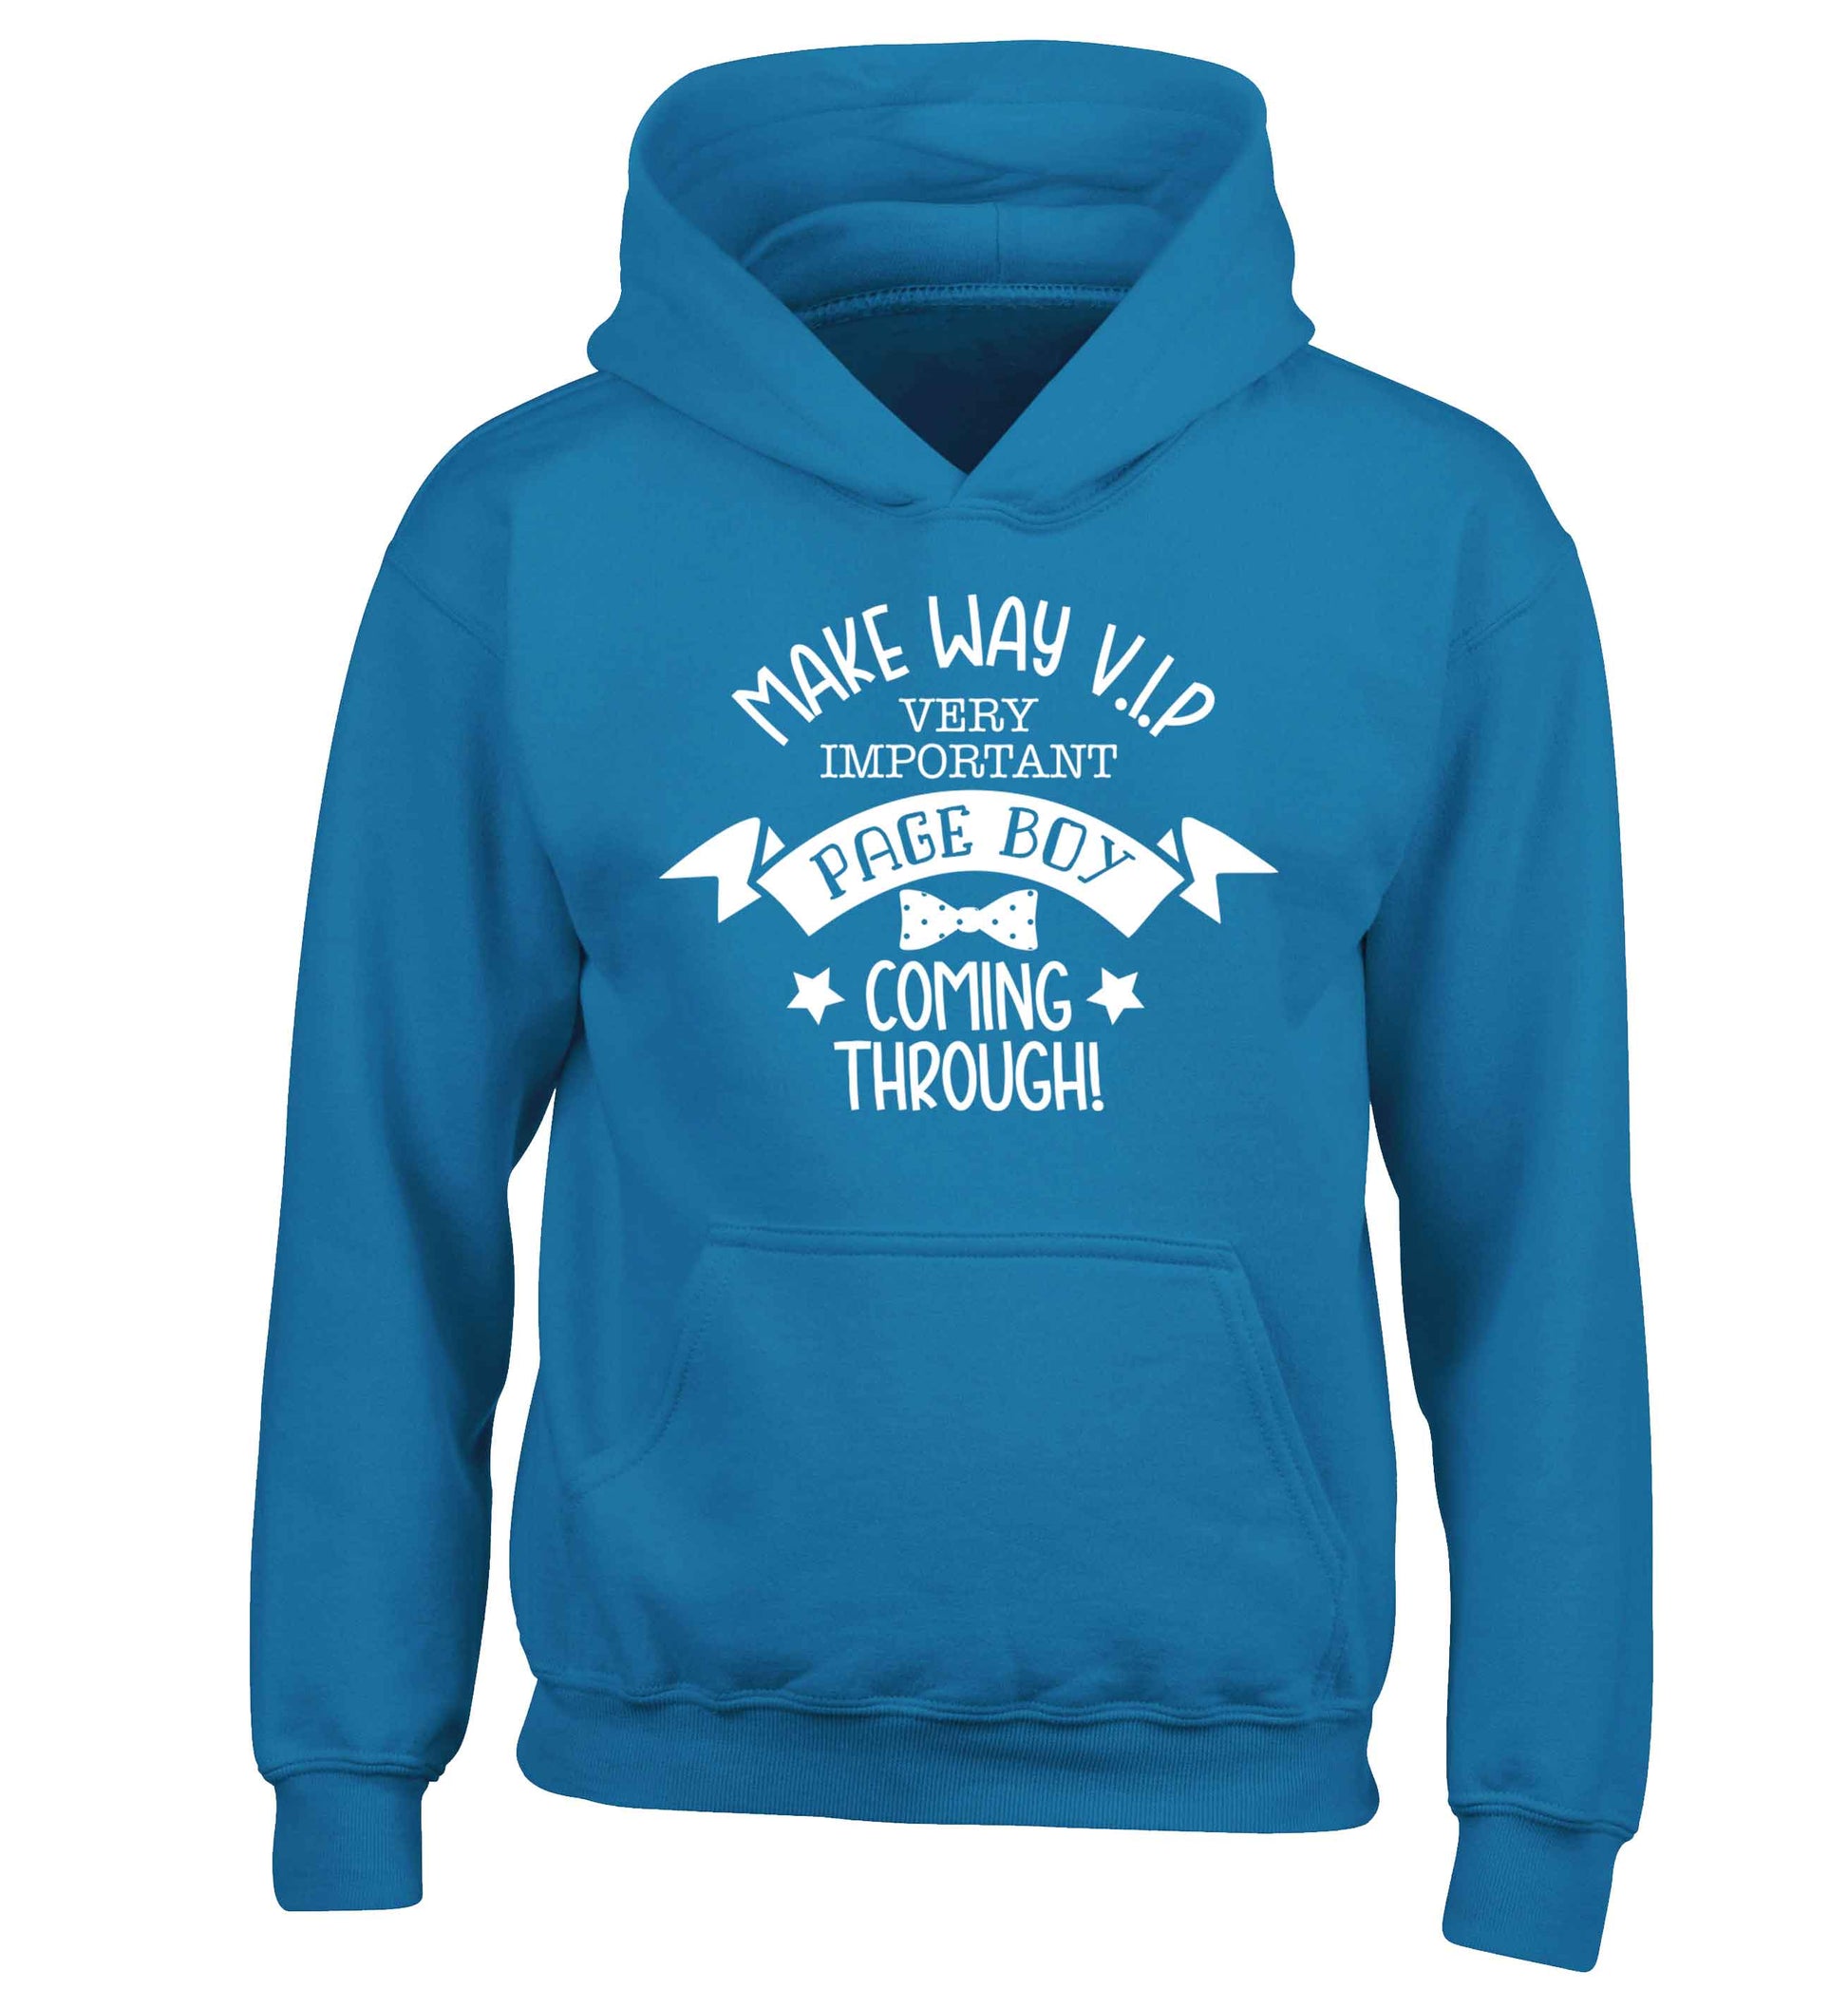 Make way V.I.P page boy coming through! children's blue hoodie 12-13 Years